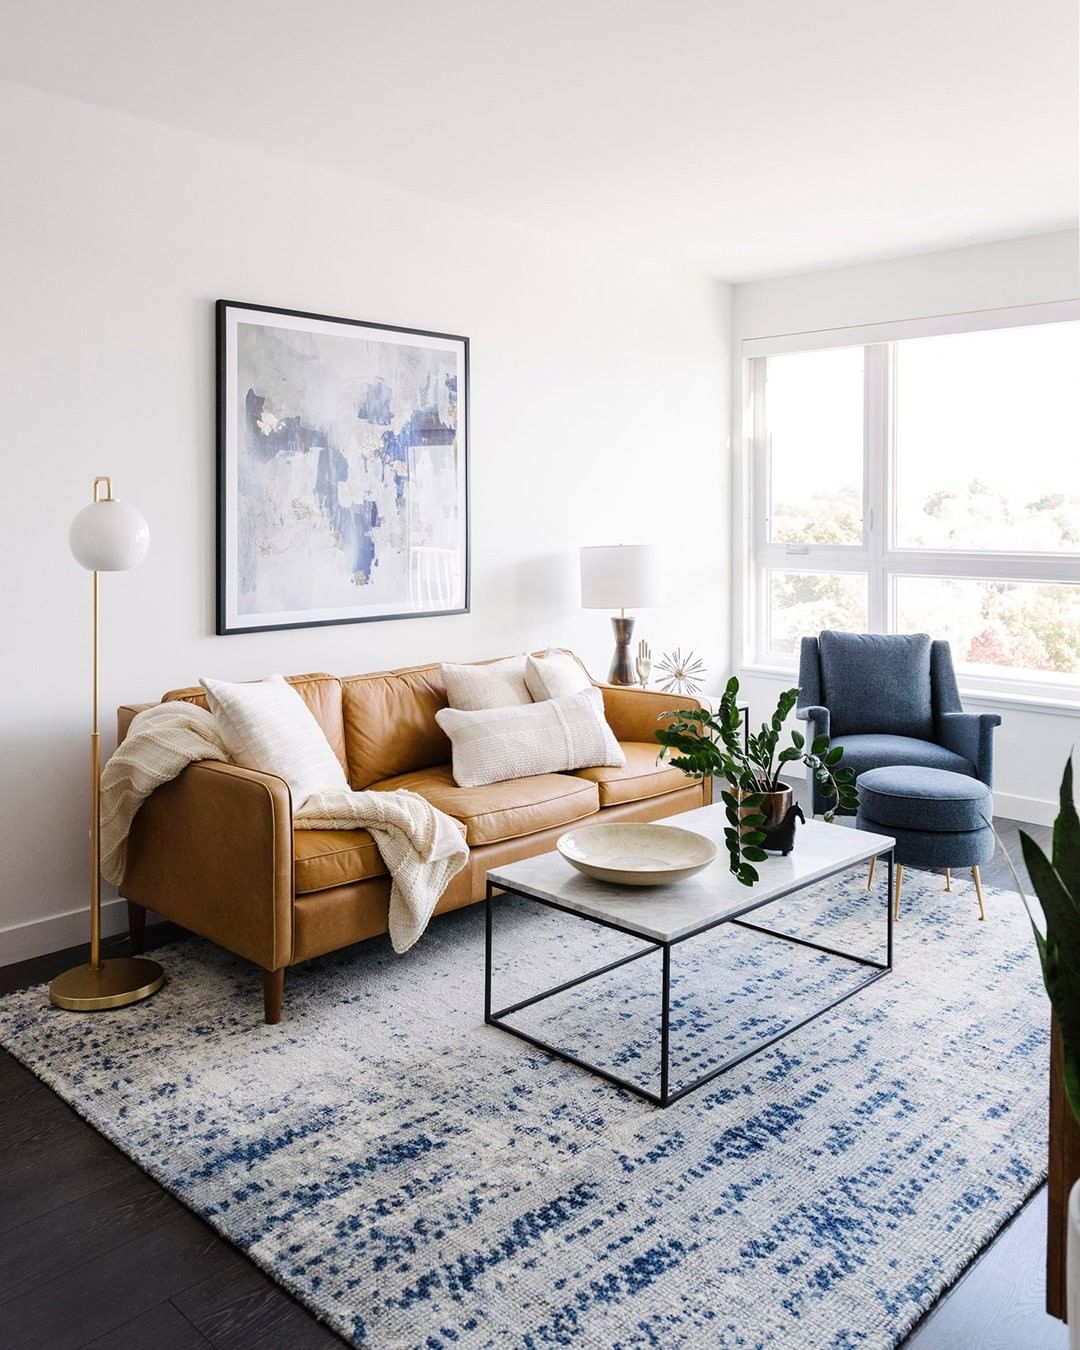 White-painted living room with tan couch and blue decor. Photo by Instagram user @westelm